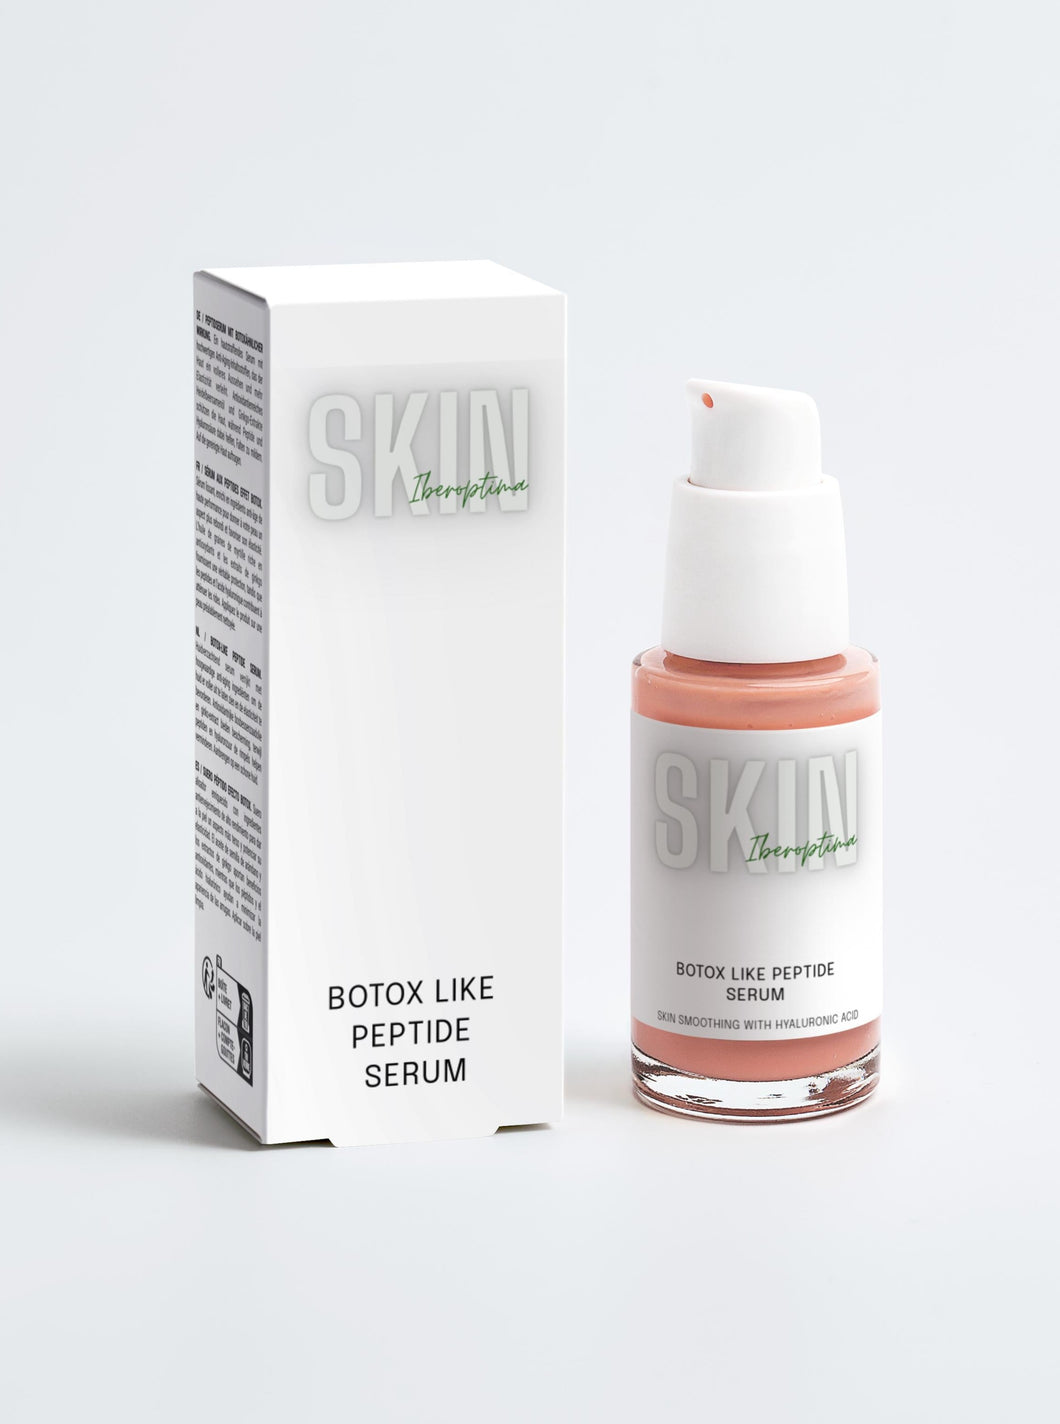 our botox serum dropper bottle with its box